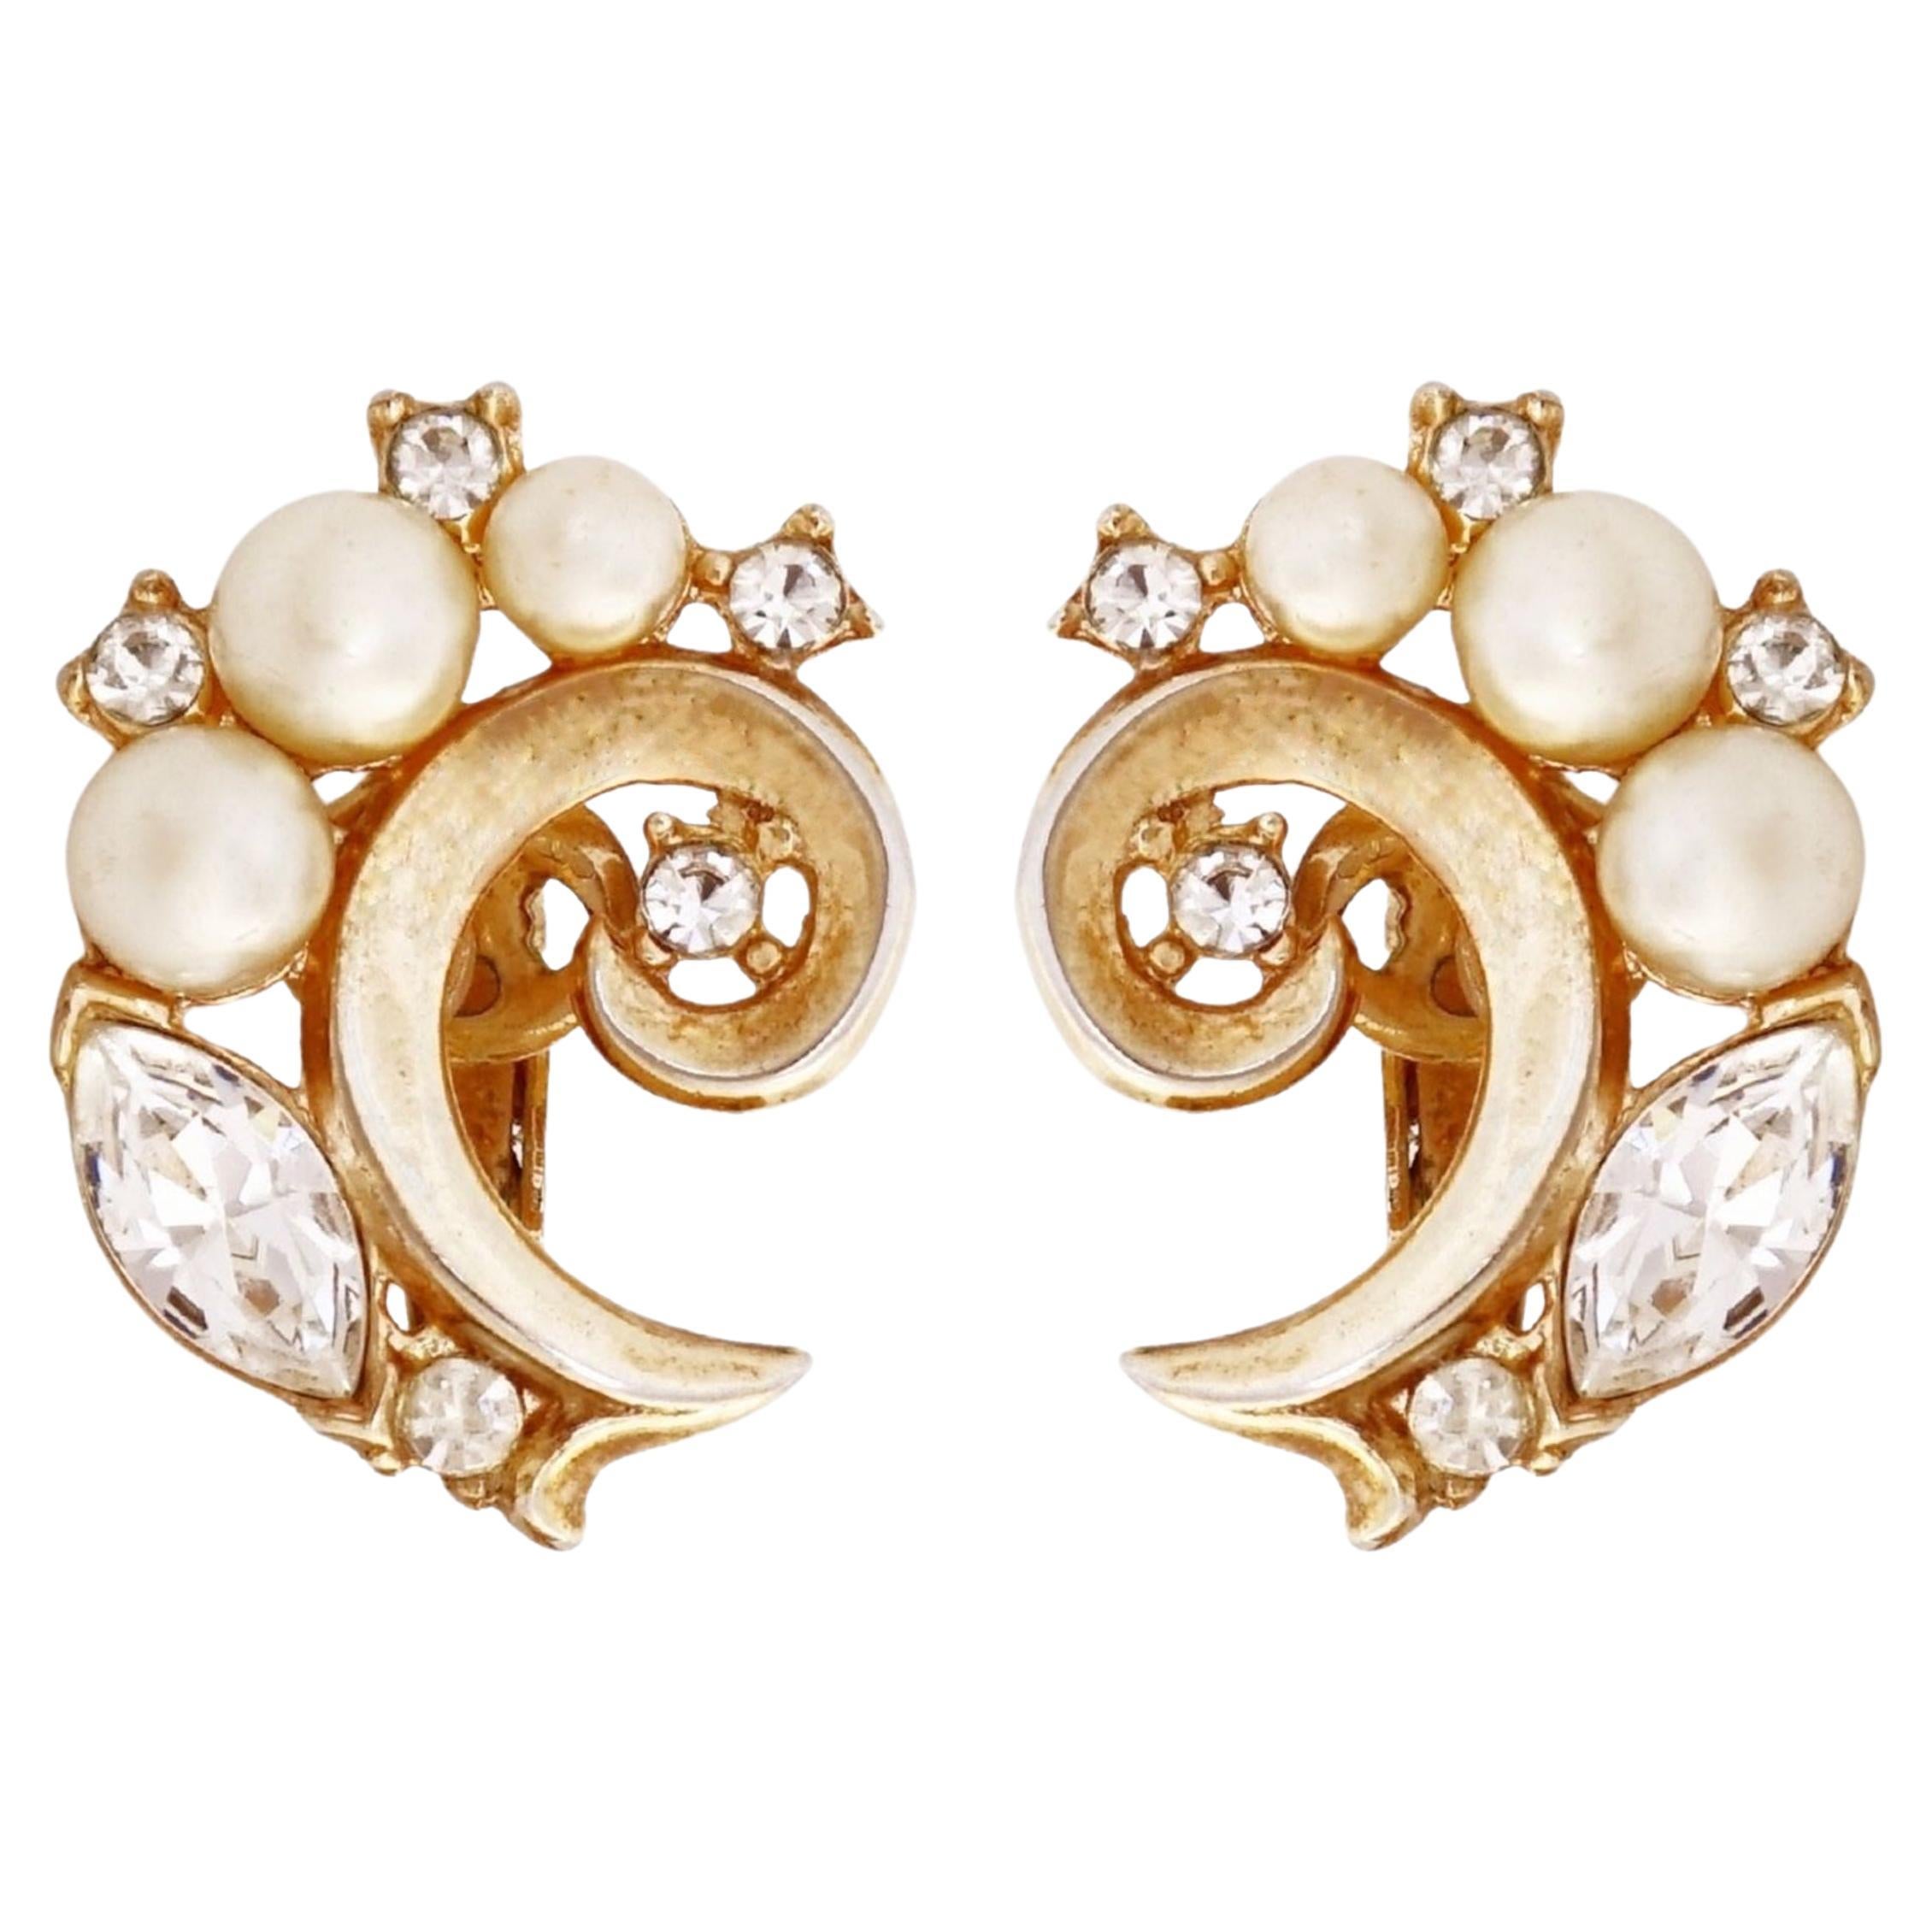 Gold Swirl Cocktail Earrings With Pearls and Crystals By Crown Trifari, 1950s